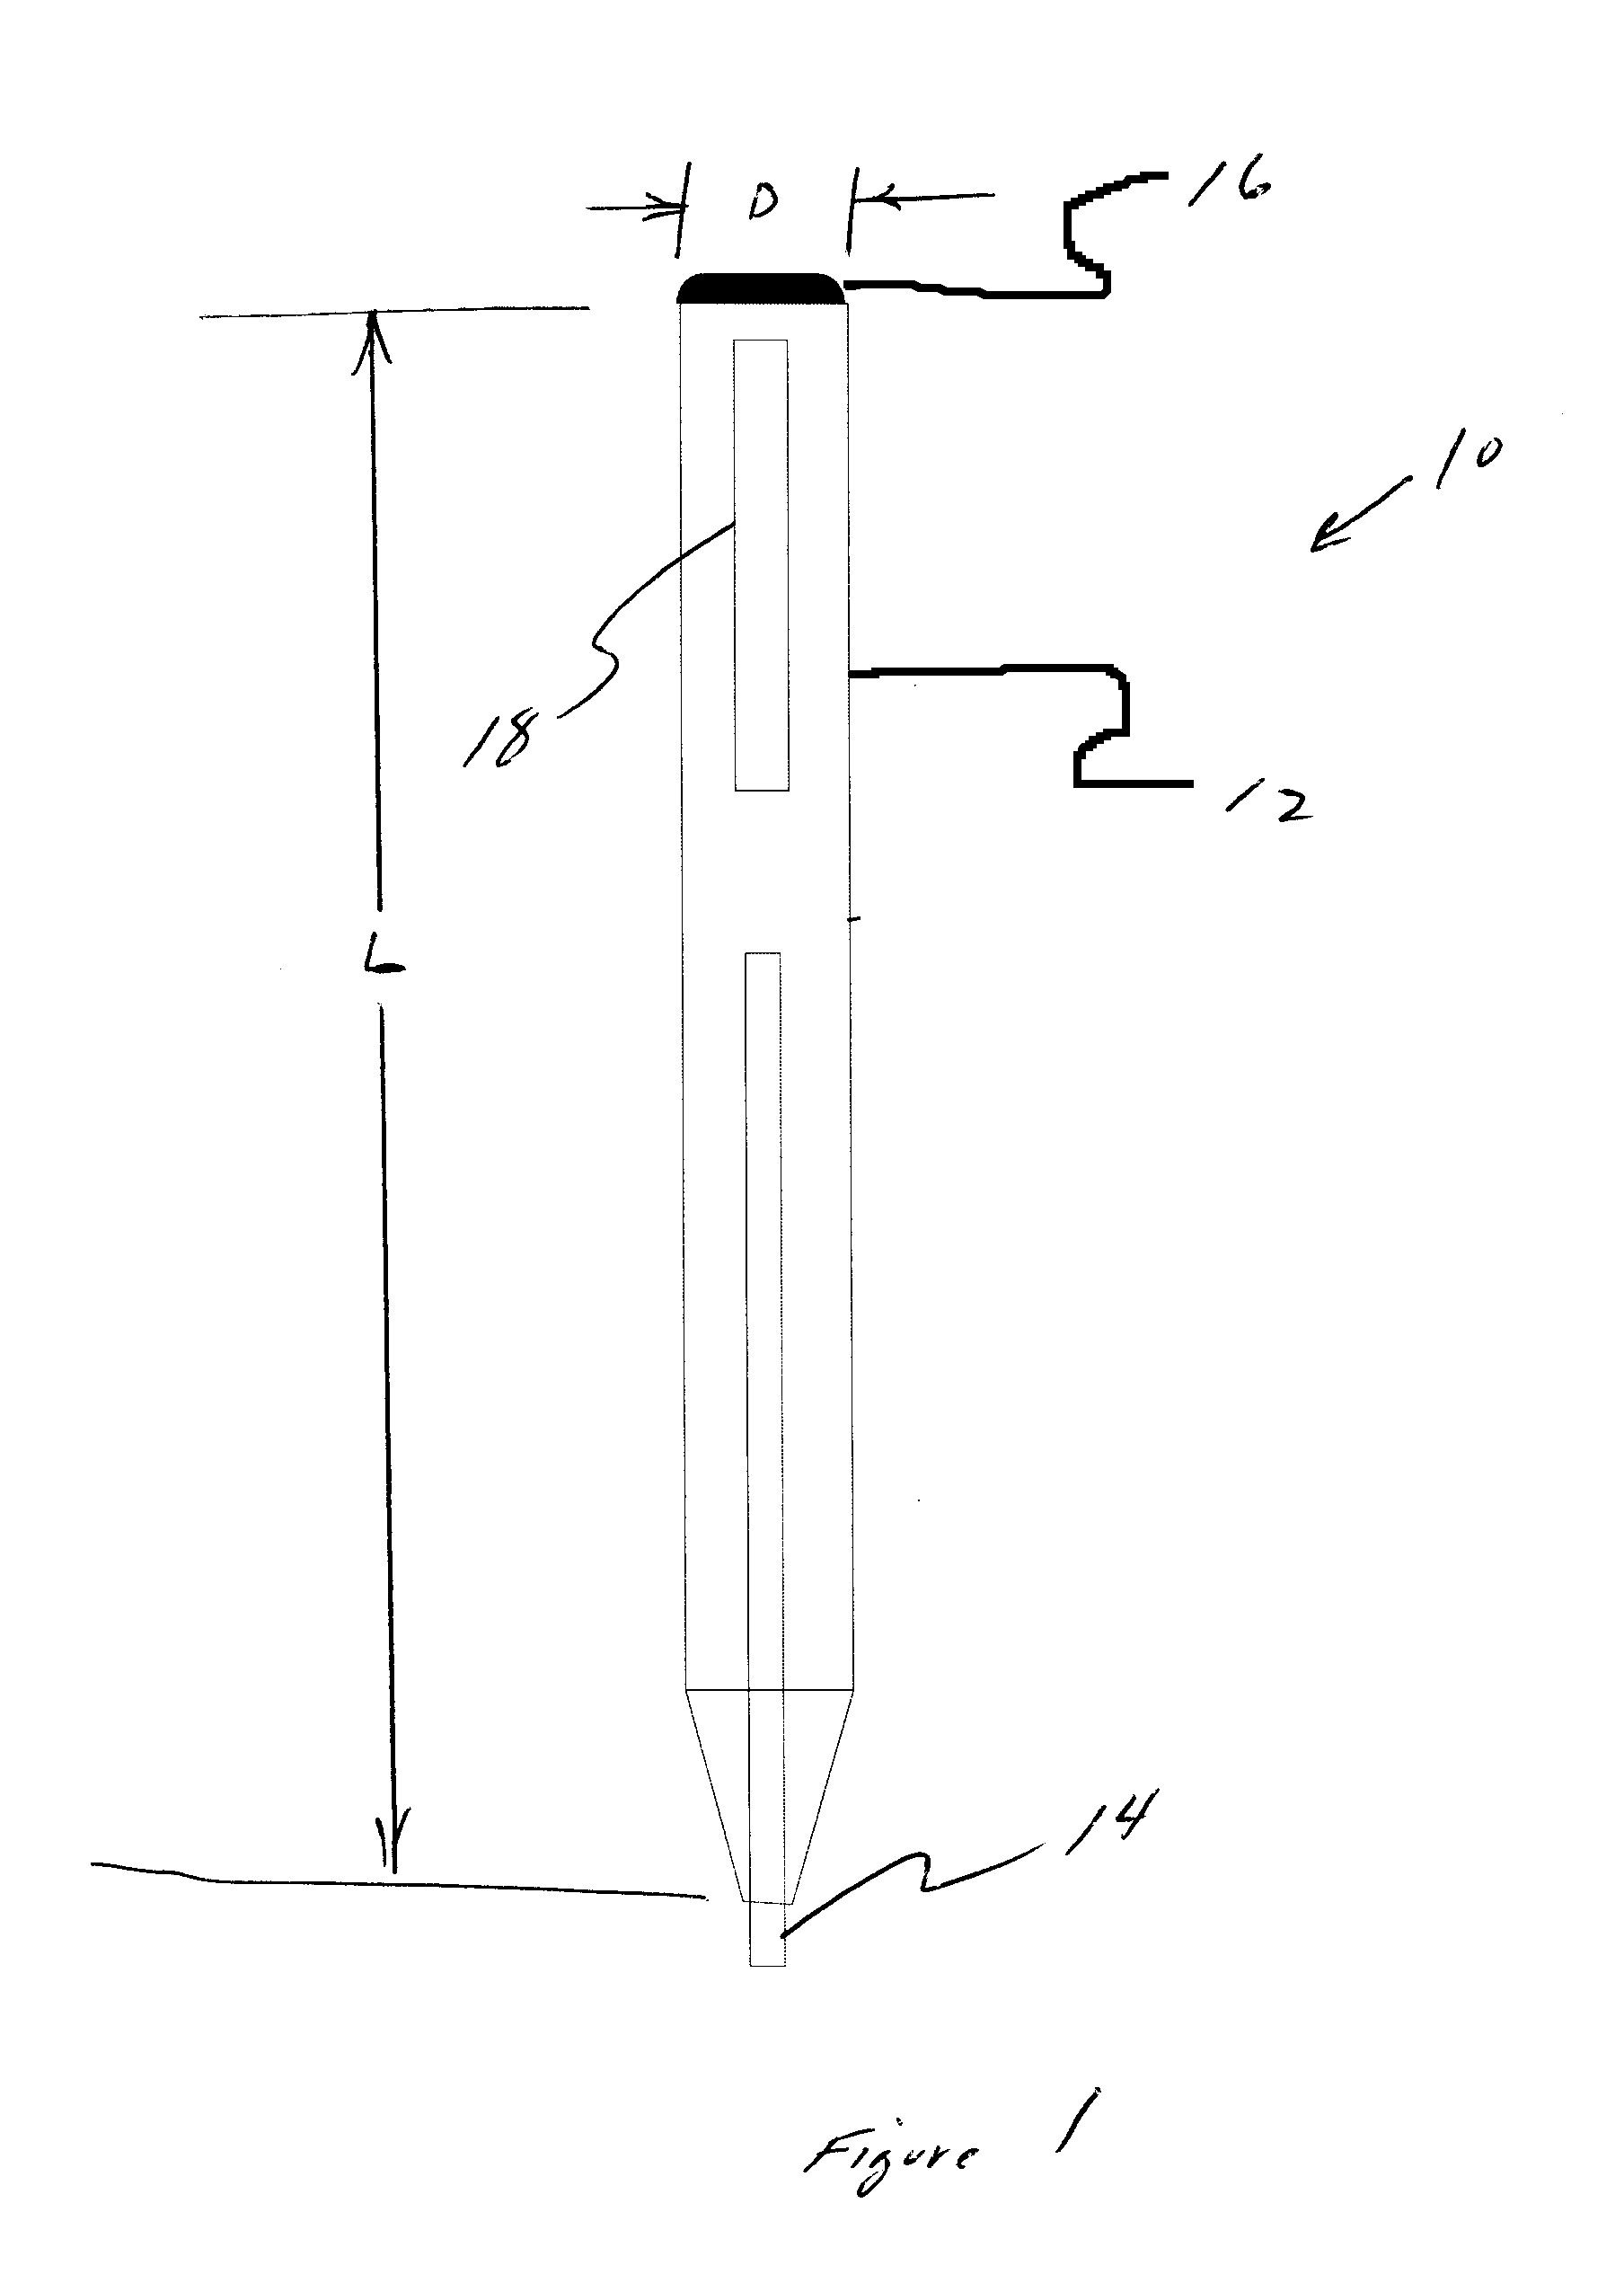 Multifunctional writing apparatus with capacitive touch screen stylus